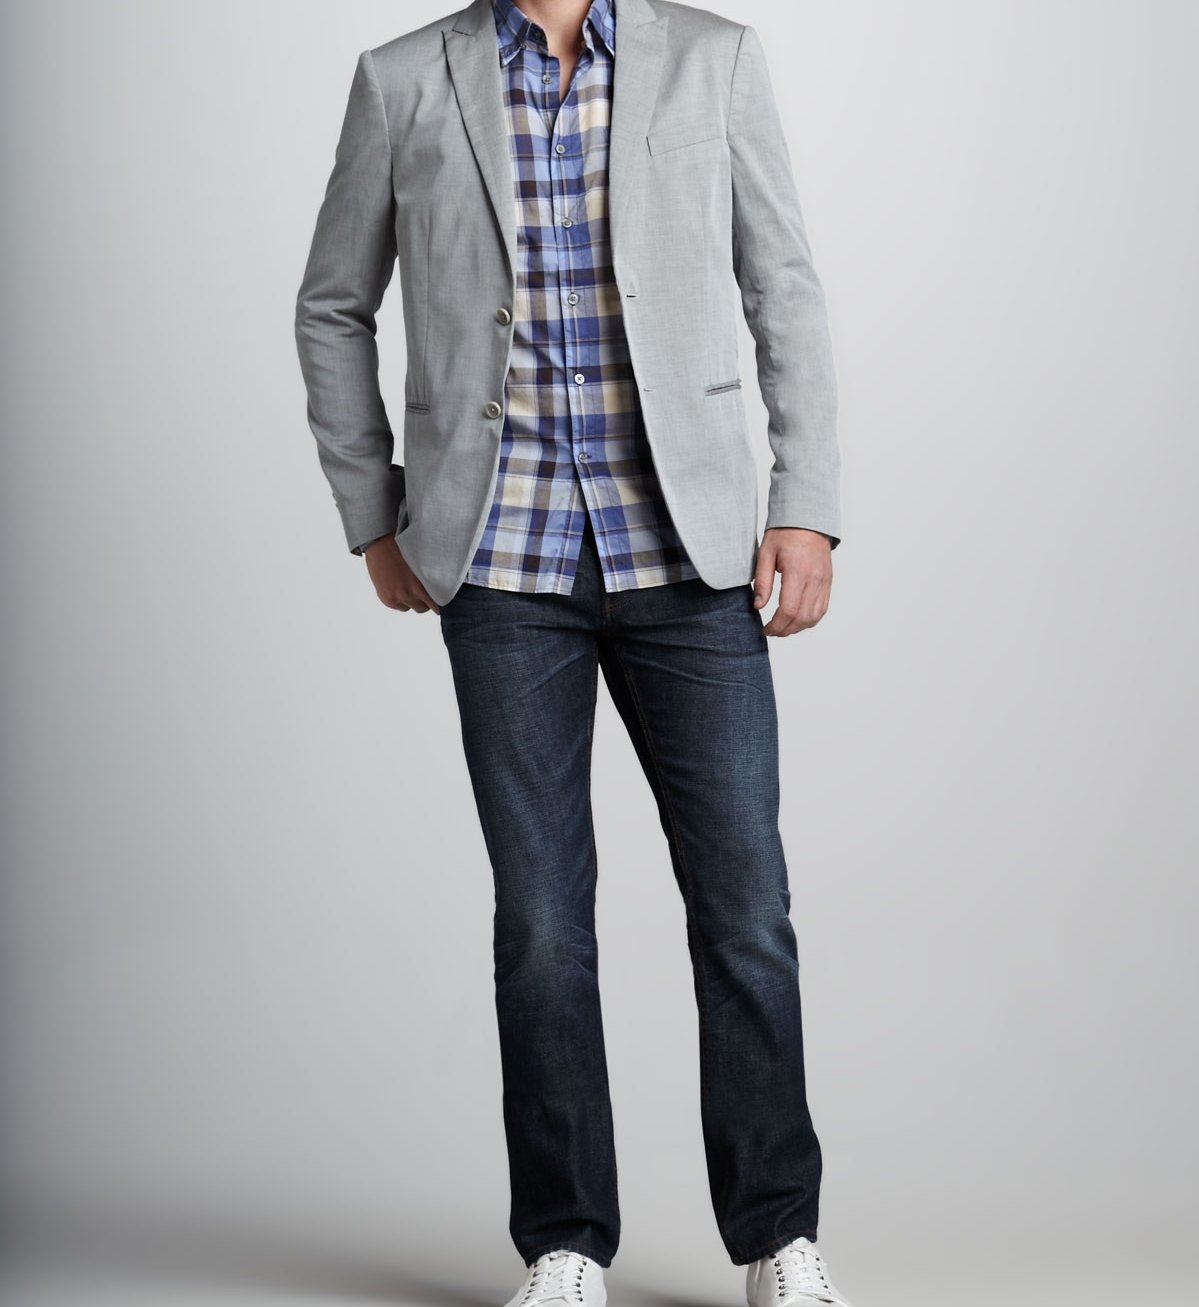 How to Wear a Sport Coat or Suit Jacket with Jeans